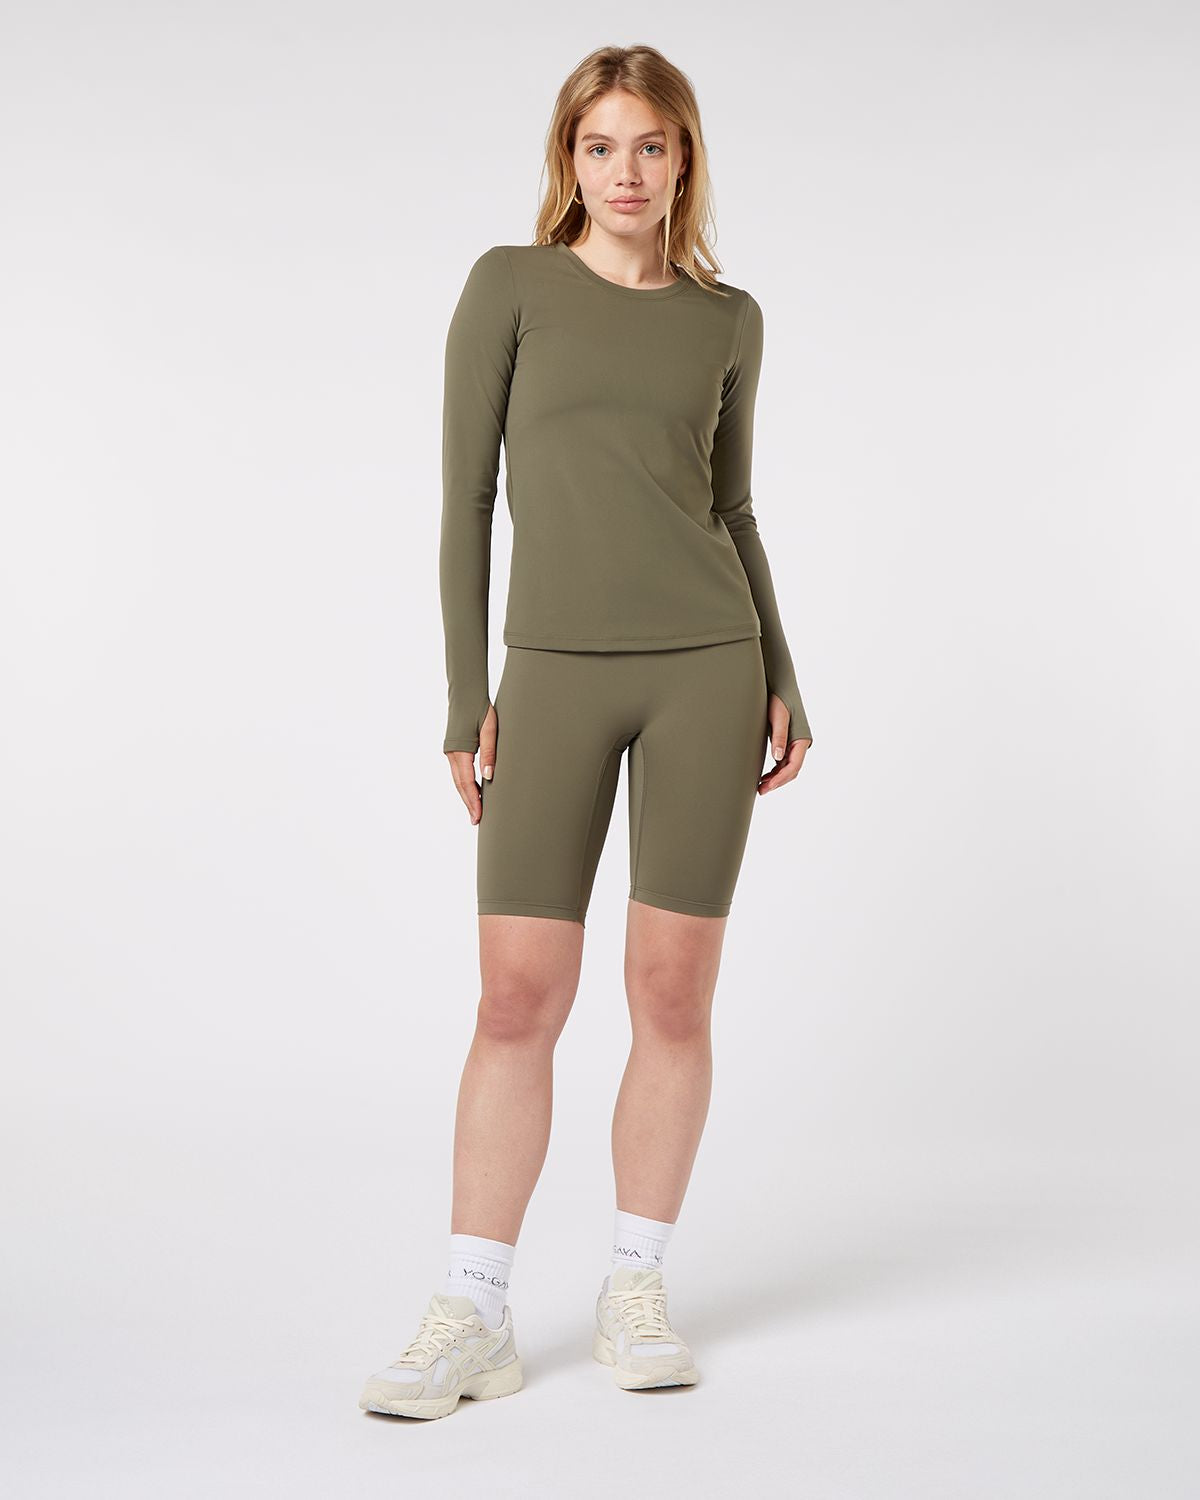 Long Sleeve Top - Olive Green